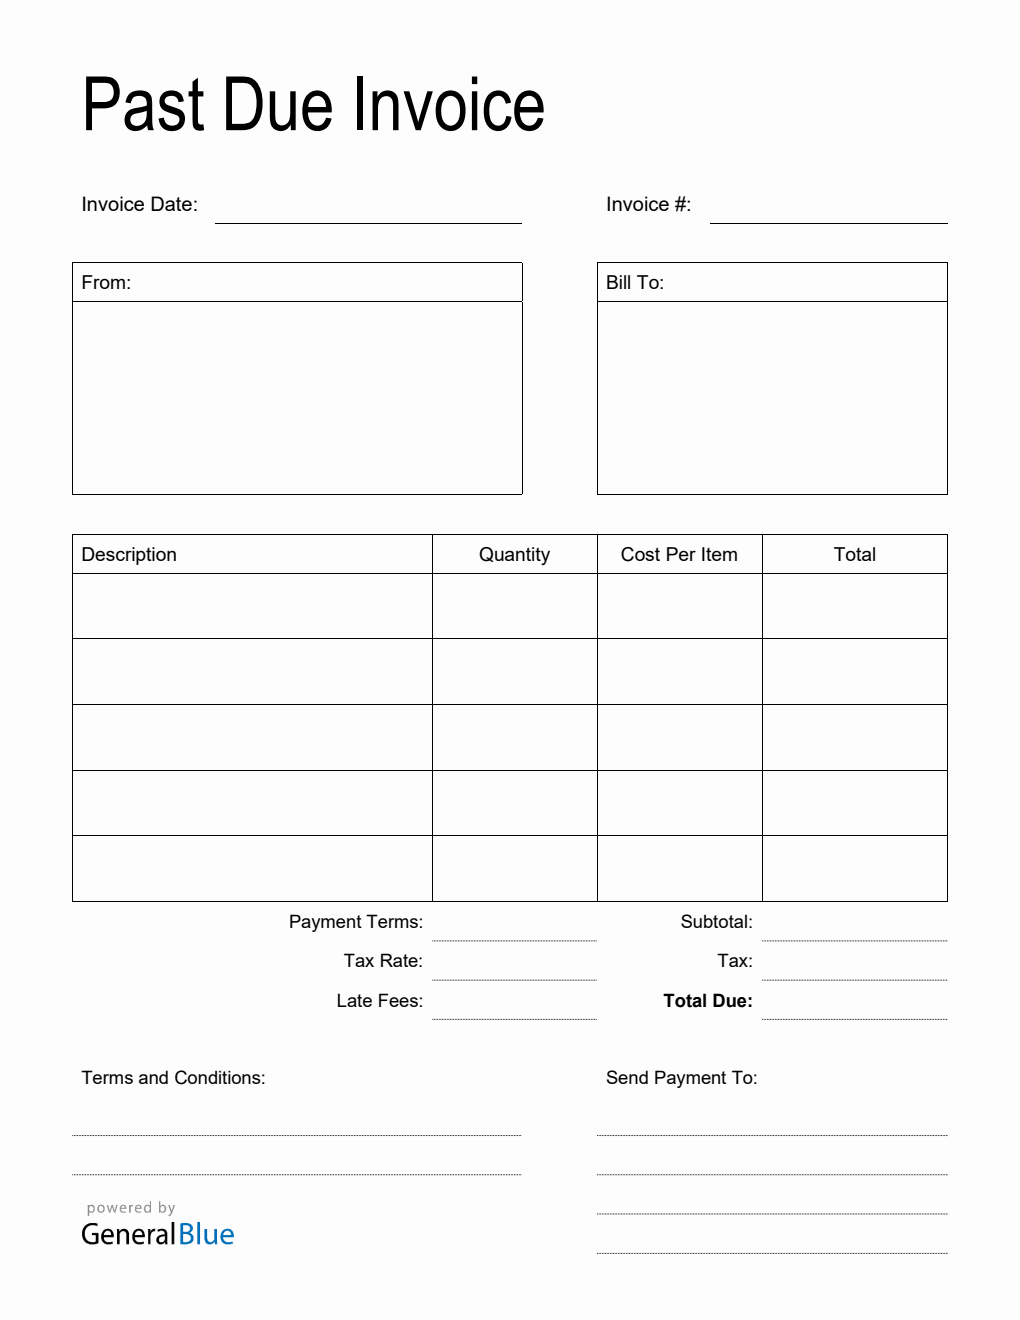 Past Due Invoice in Word (Printable)